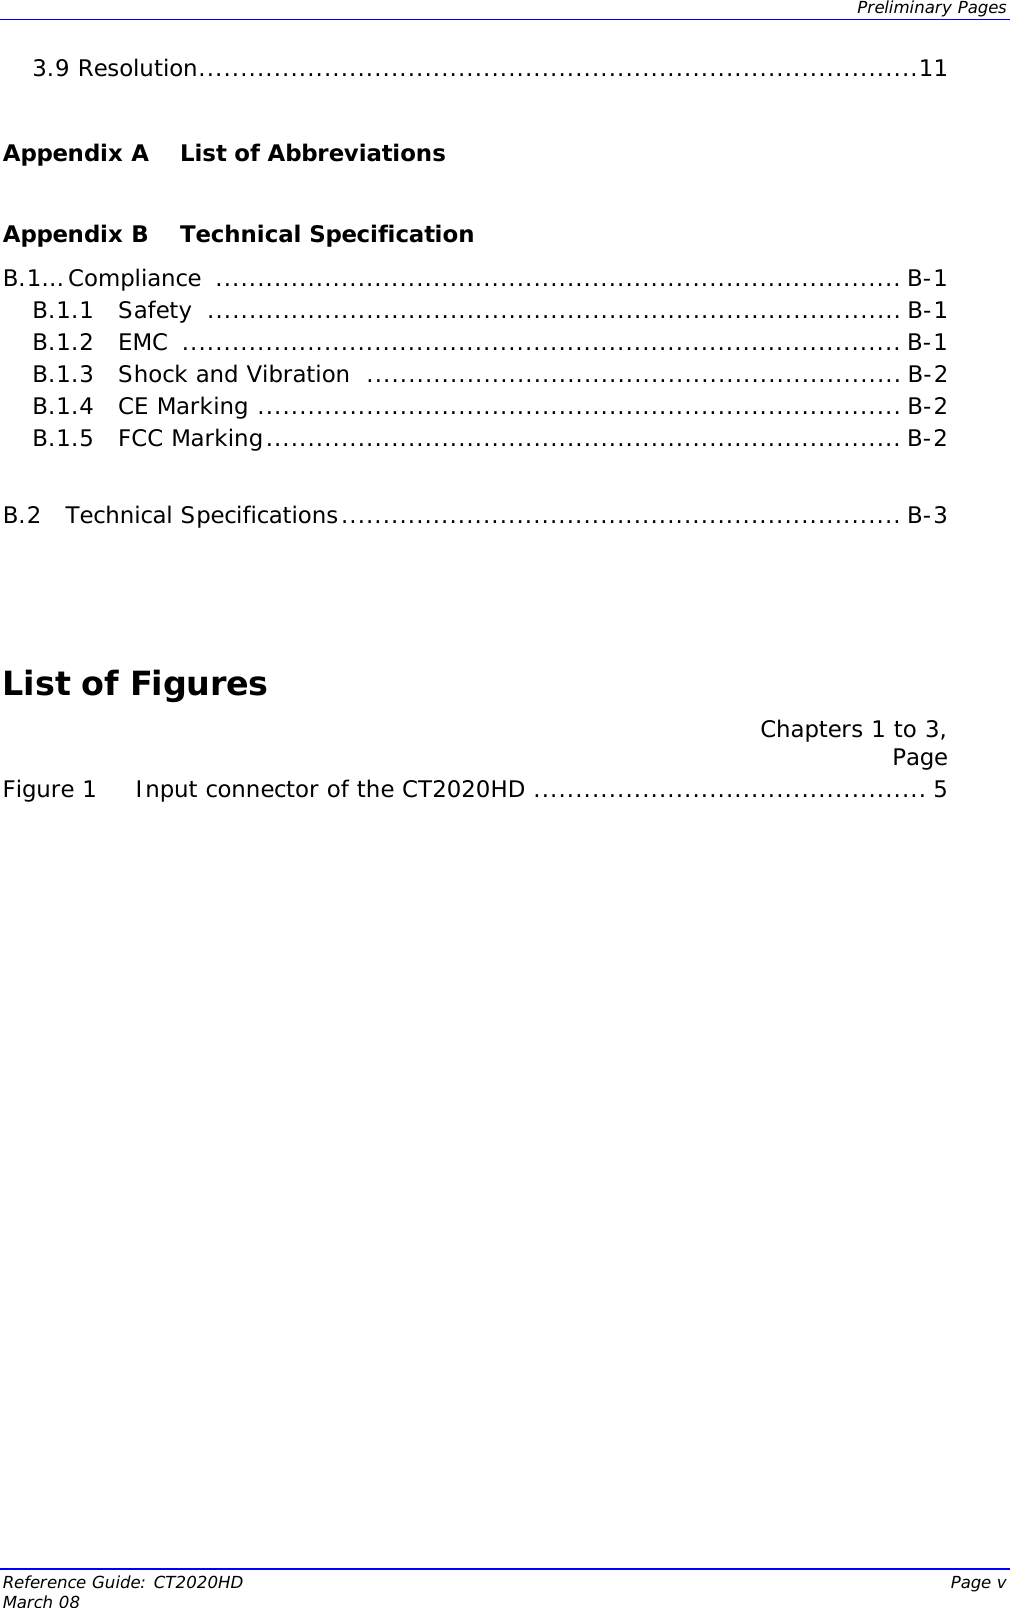  Preliminary Pages Reference Guide: CT2020HD  Page v March 08 3.9 Resolution......................................................................................11  Appendix A  List of Abbreviations  Appendix B  Technical Specification B.1… Compliance  .................................................................................. B-1 B.1.1   Safety  ................................................................................... B-1 B.1.2   EMC  ...................................................................................... B-1 B.1.3   Shock and Vibration  ................................................................ B-2 B.1.4   CE Marking ............................................................................. B-2 B.1.5   FCC Marking............................................................................ B-2  B.2   Technical Specifications................................................................... B-3    List of Figures Chapters 1 to 3,  Page Figure 1 Input connector of the CT2020HD ............................................... 5    